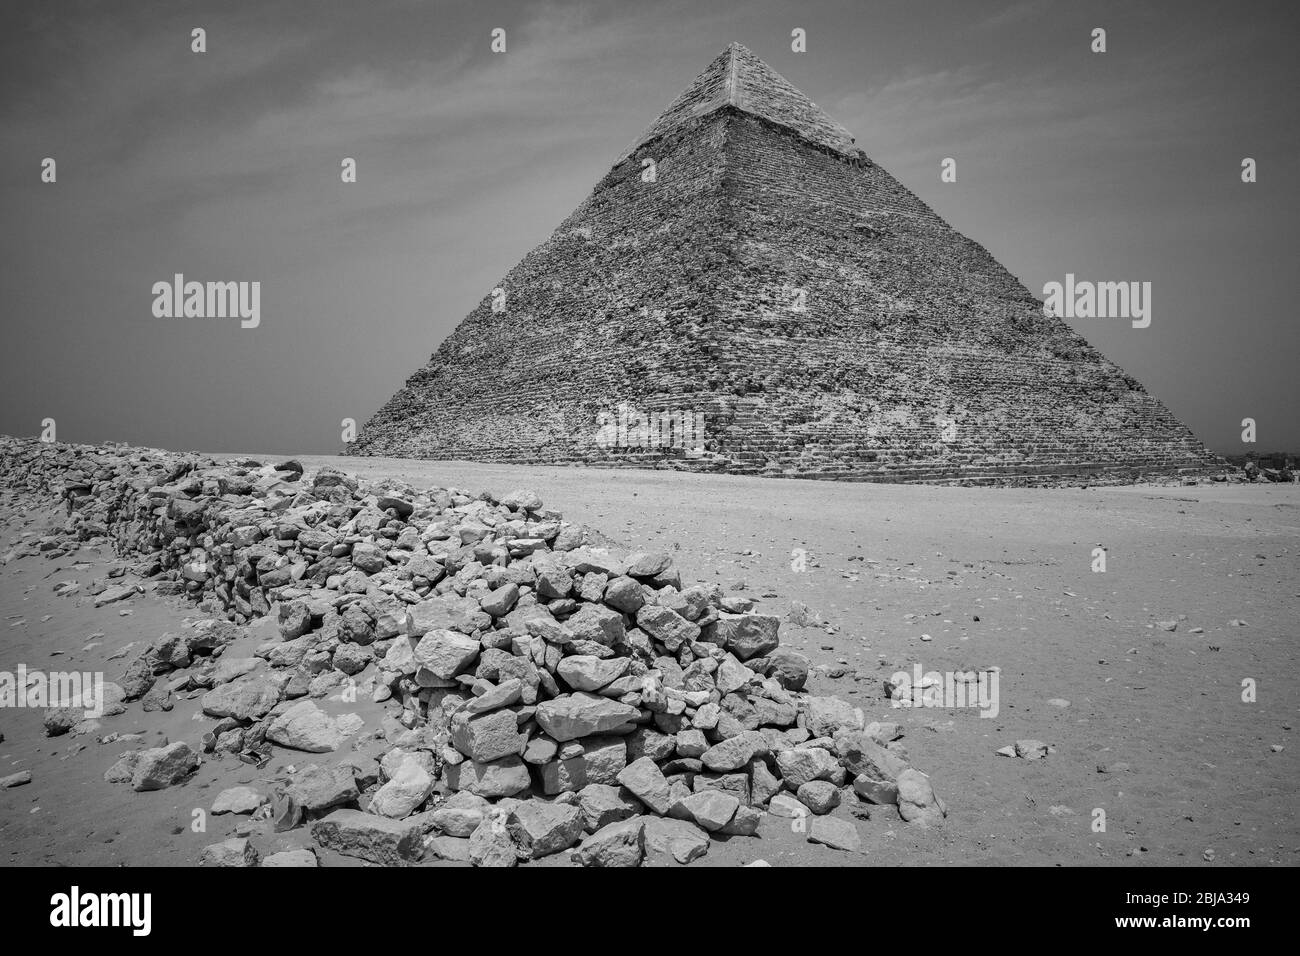 The Pyramid of Khafre (Pyramid of Chephren), the second-tallest of the Ancient Egyptian Pyramids of Giza in Giza Plateau in Cairo, Egypt Stock Photo